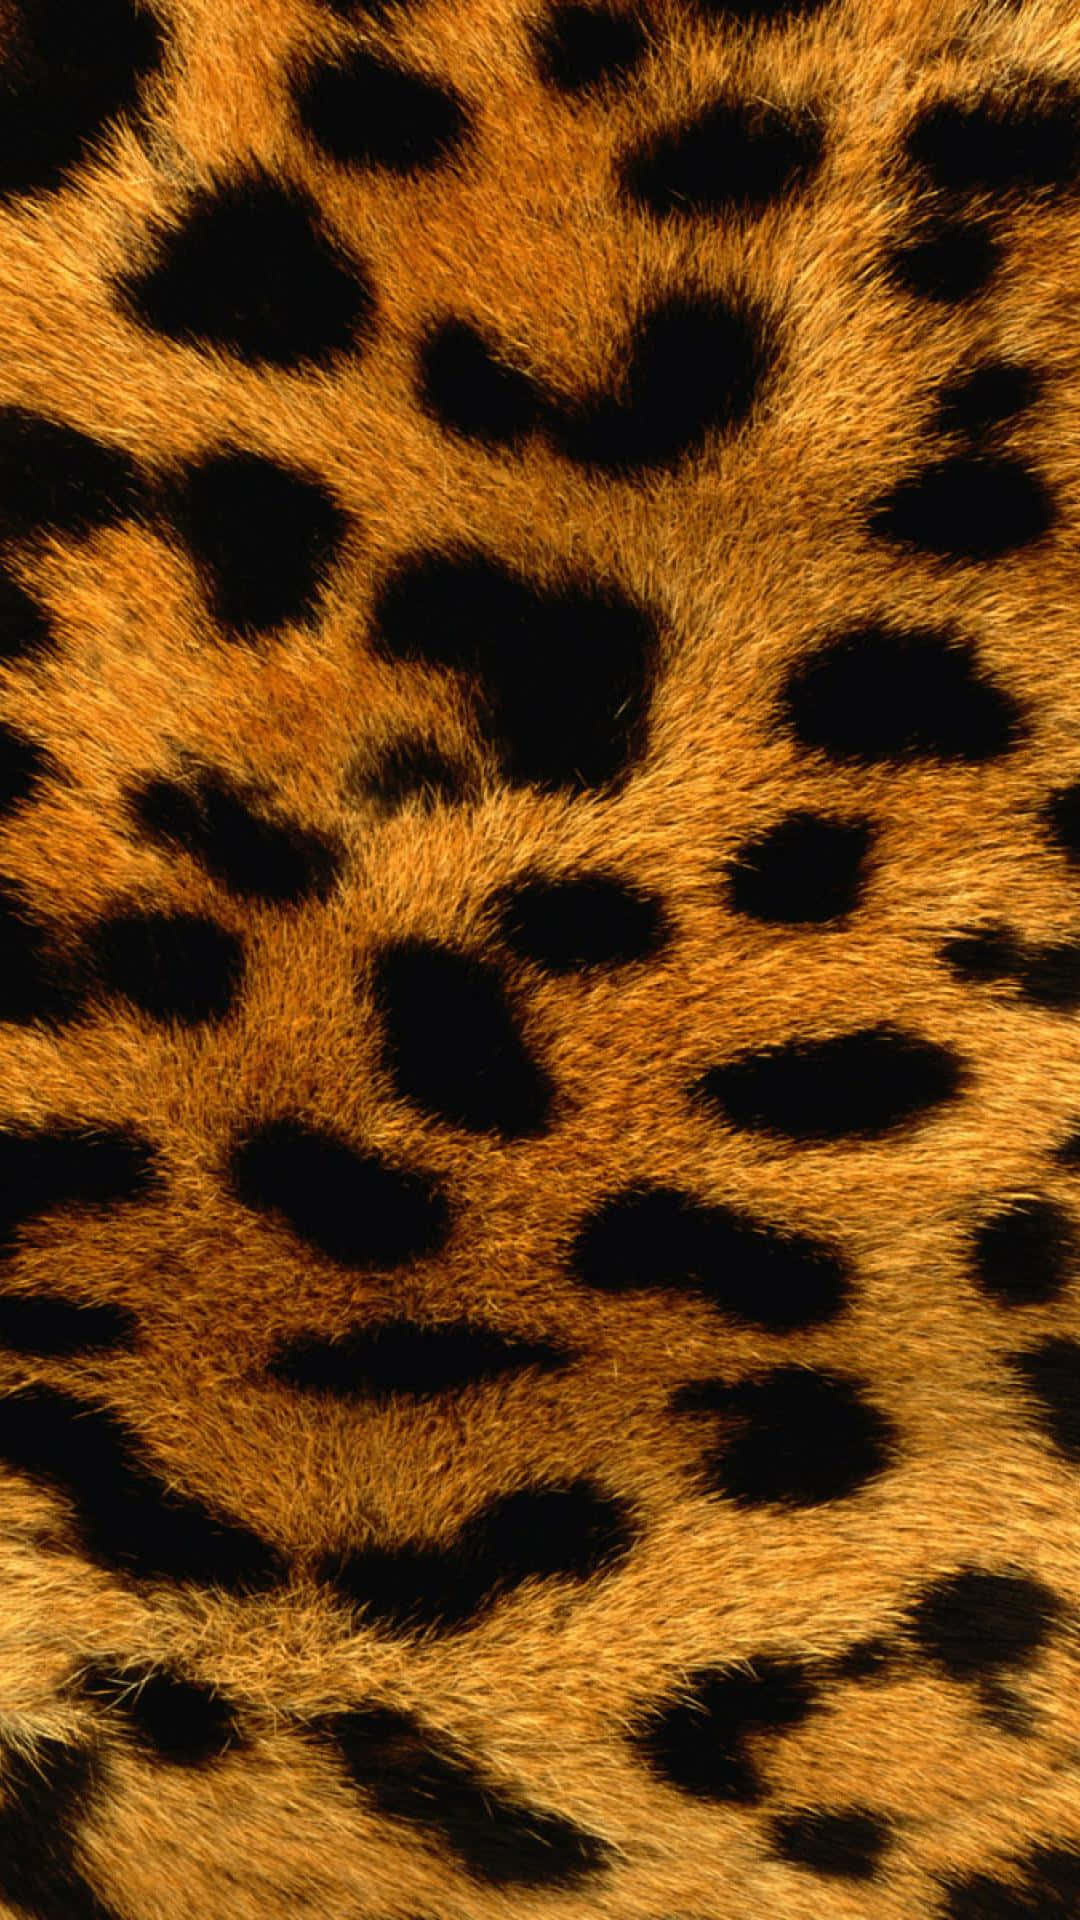 A Unique iPhone X with a Spirited Animal Print Design Wallpaper